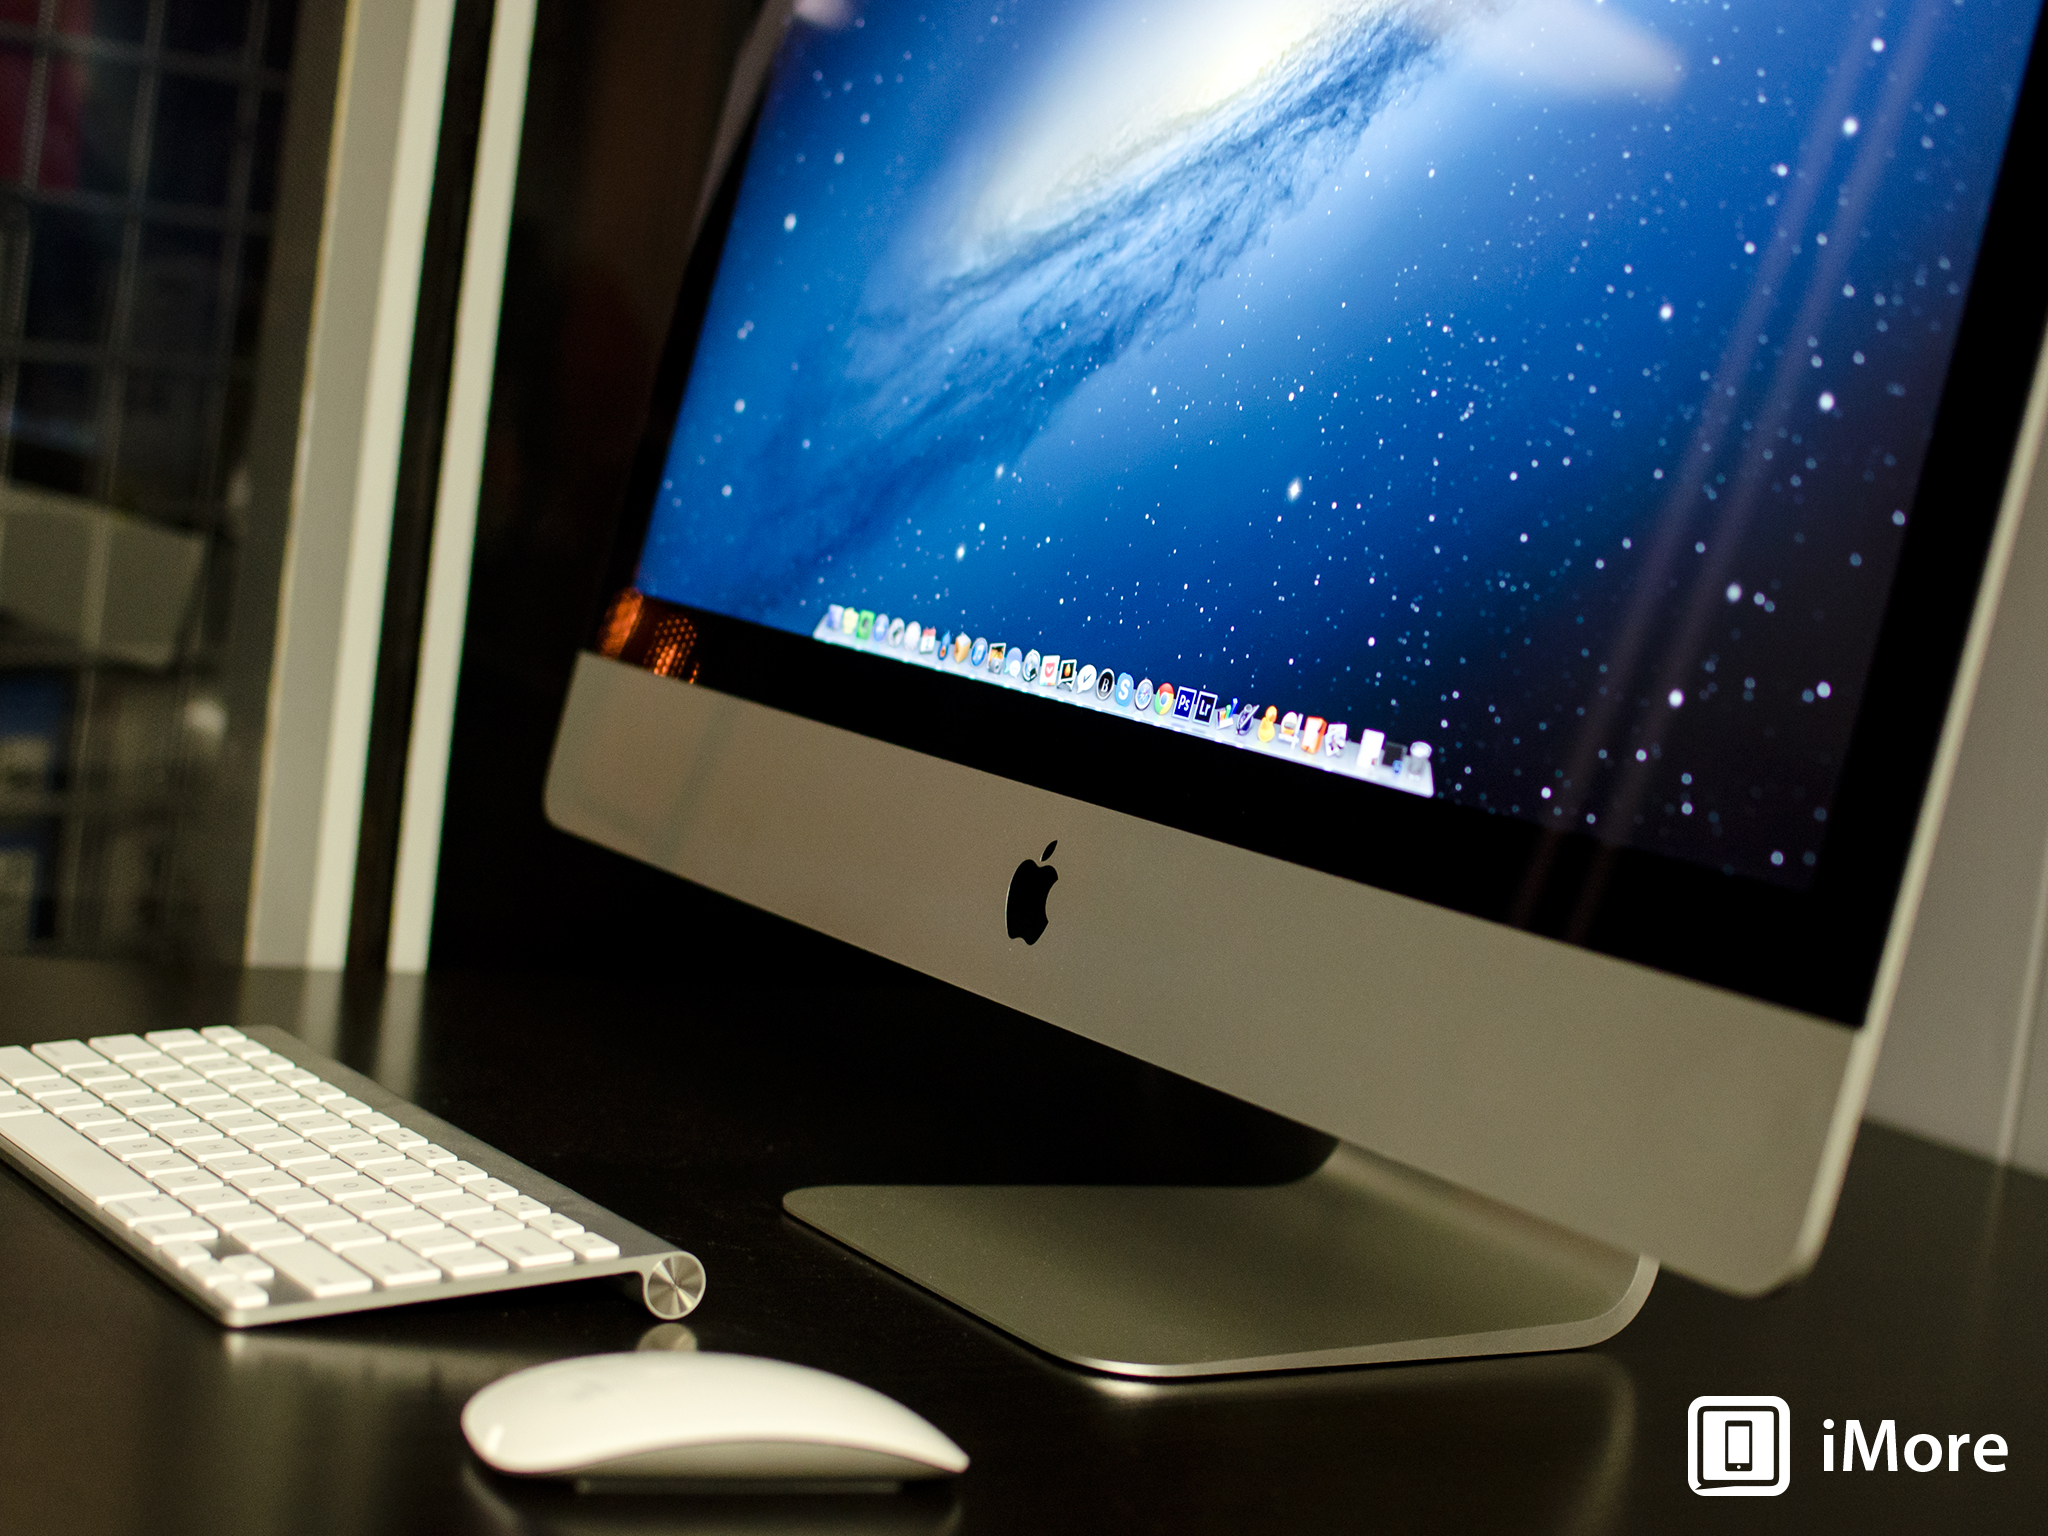 How to speed up your Mac by verifying and repairing disk permissions